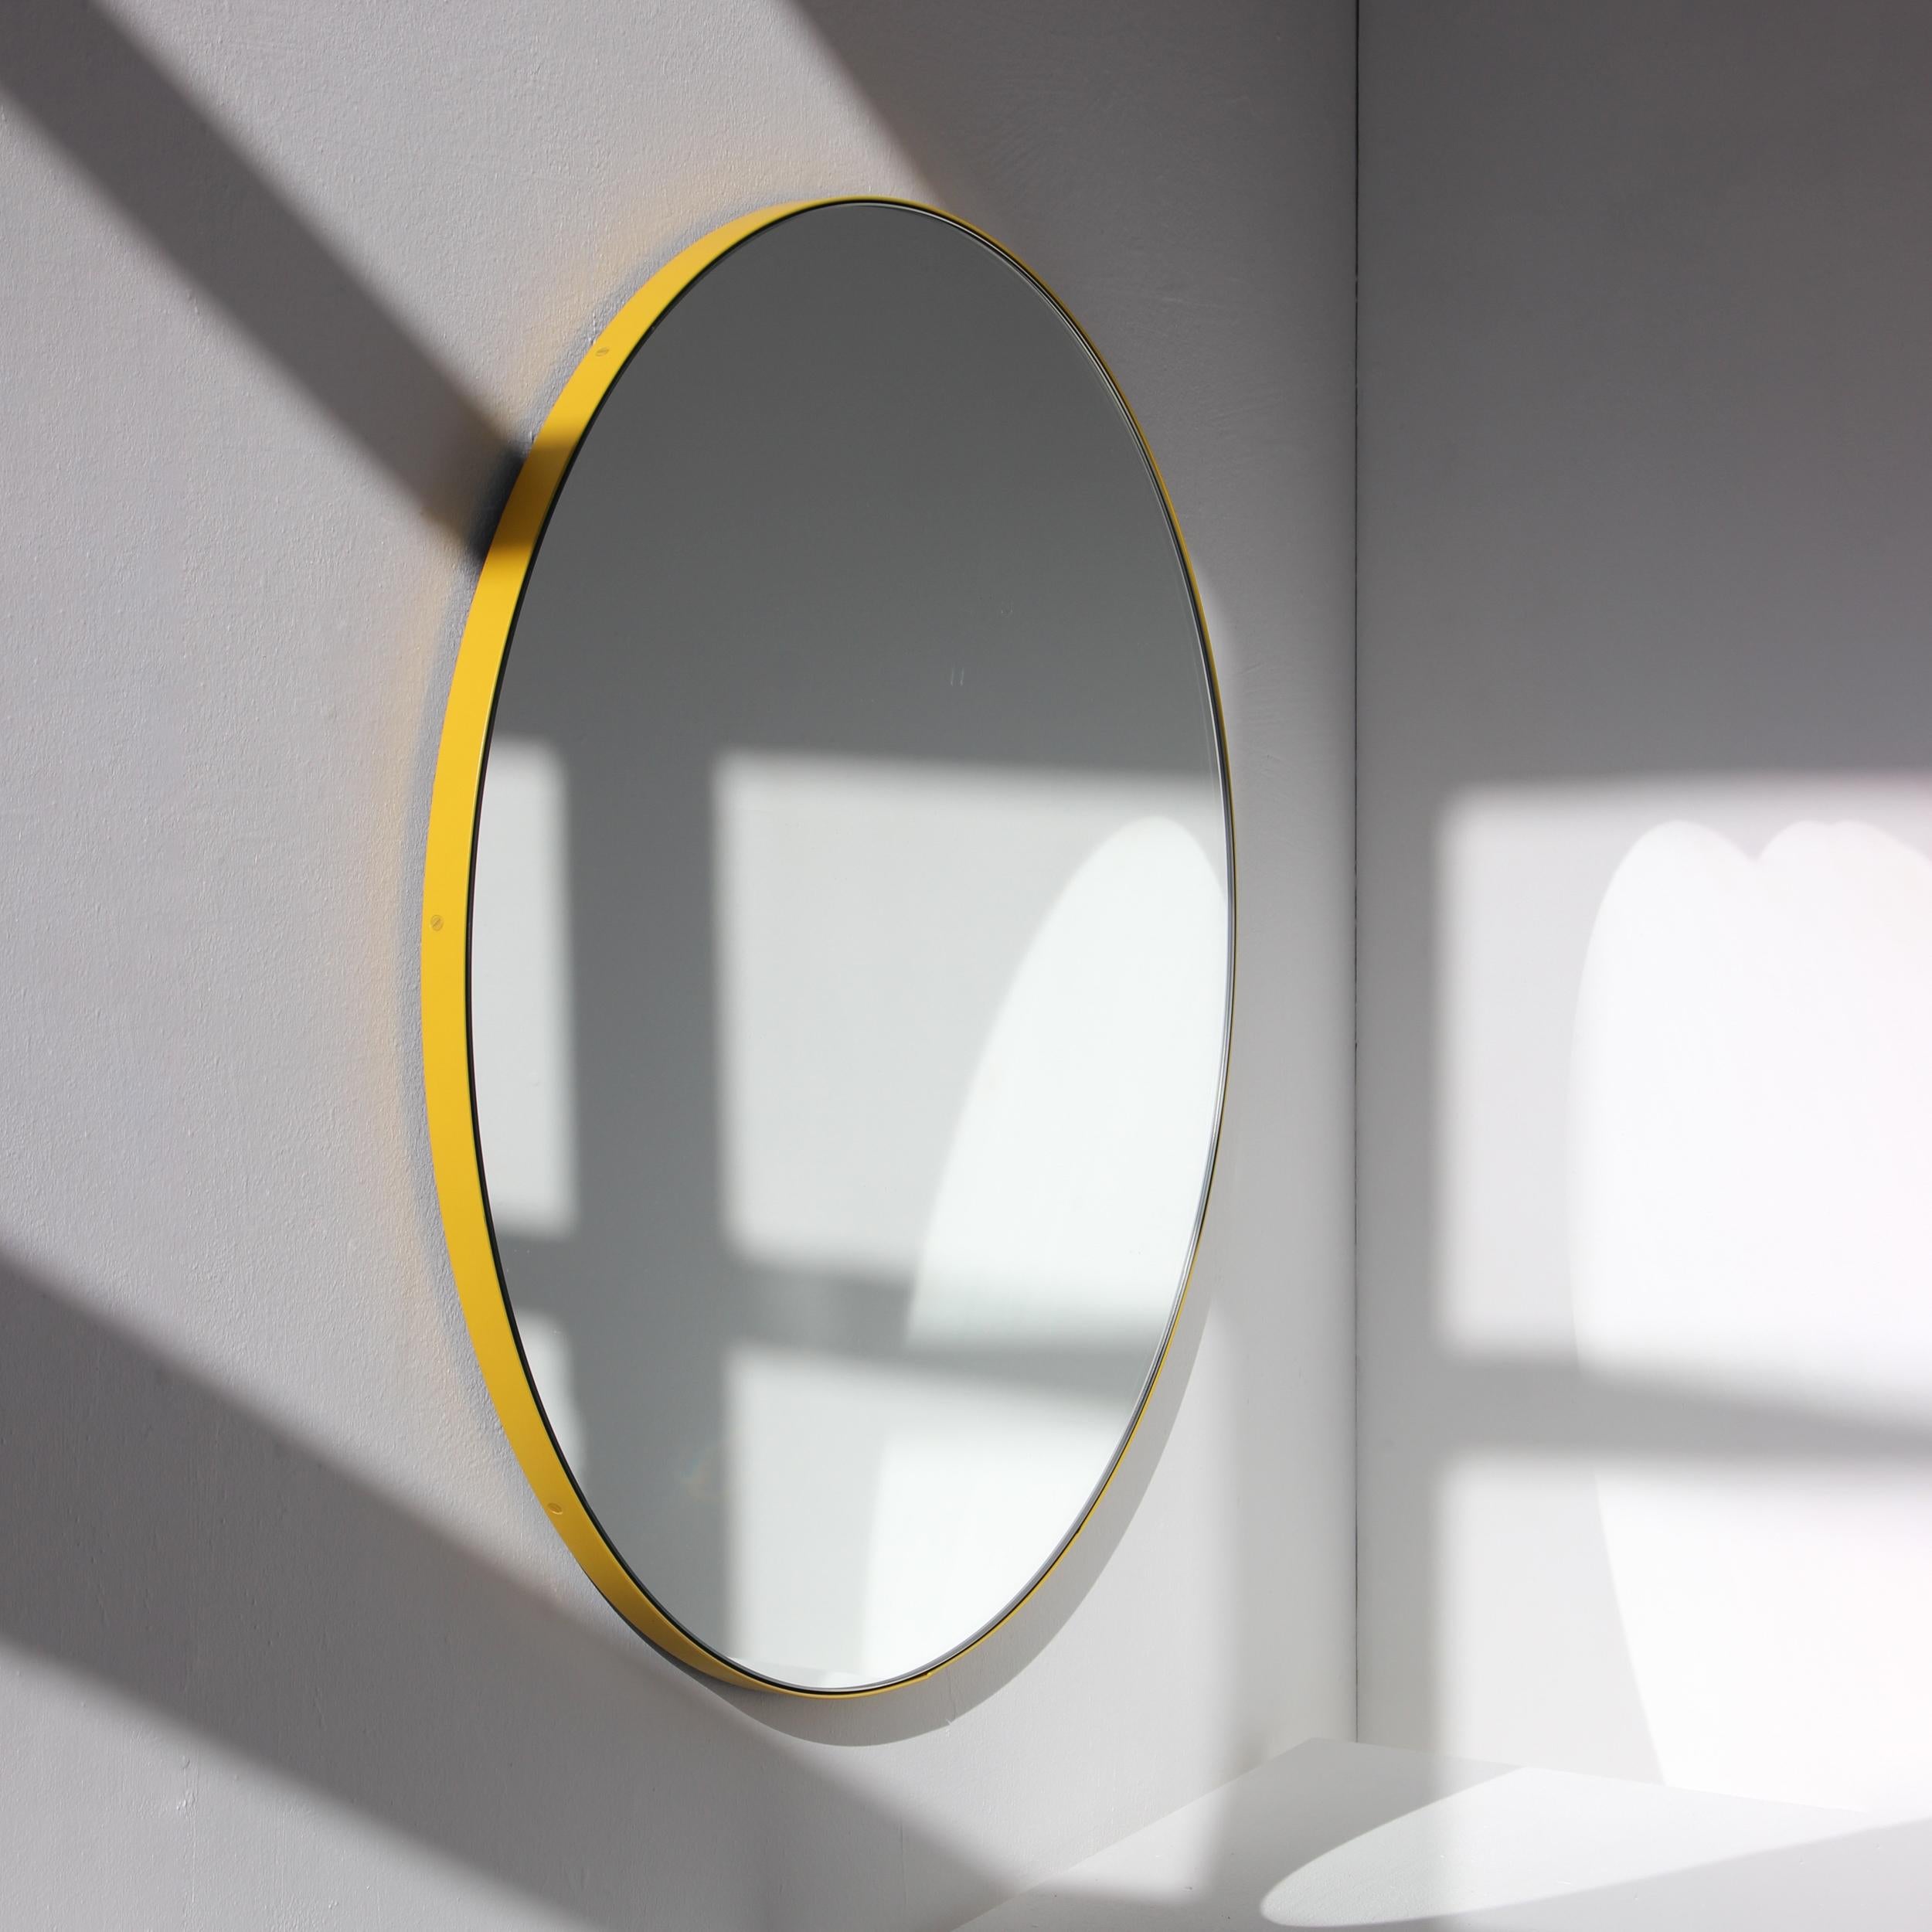 Minimalist round mirror with a modern aluminium powder coated yellow frame. Designed and handcrafted in London, UK.

Medium, large and extra-large mirrors (60, 80 and 100cm) are fitted with an ingenious French cleat (split batten) system so they may